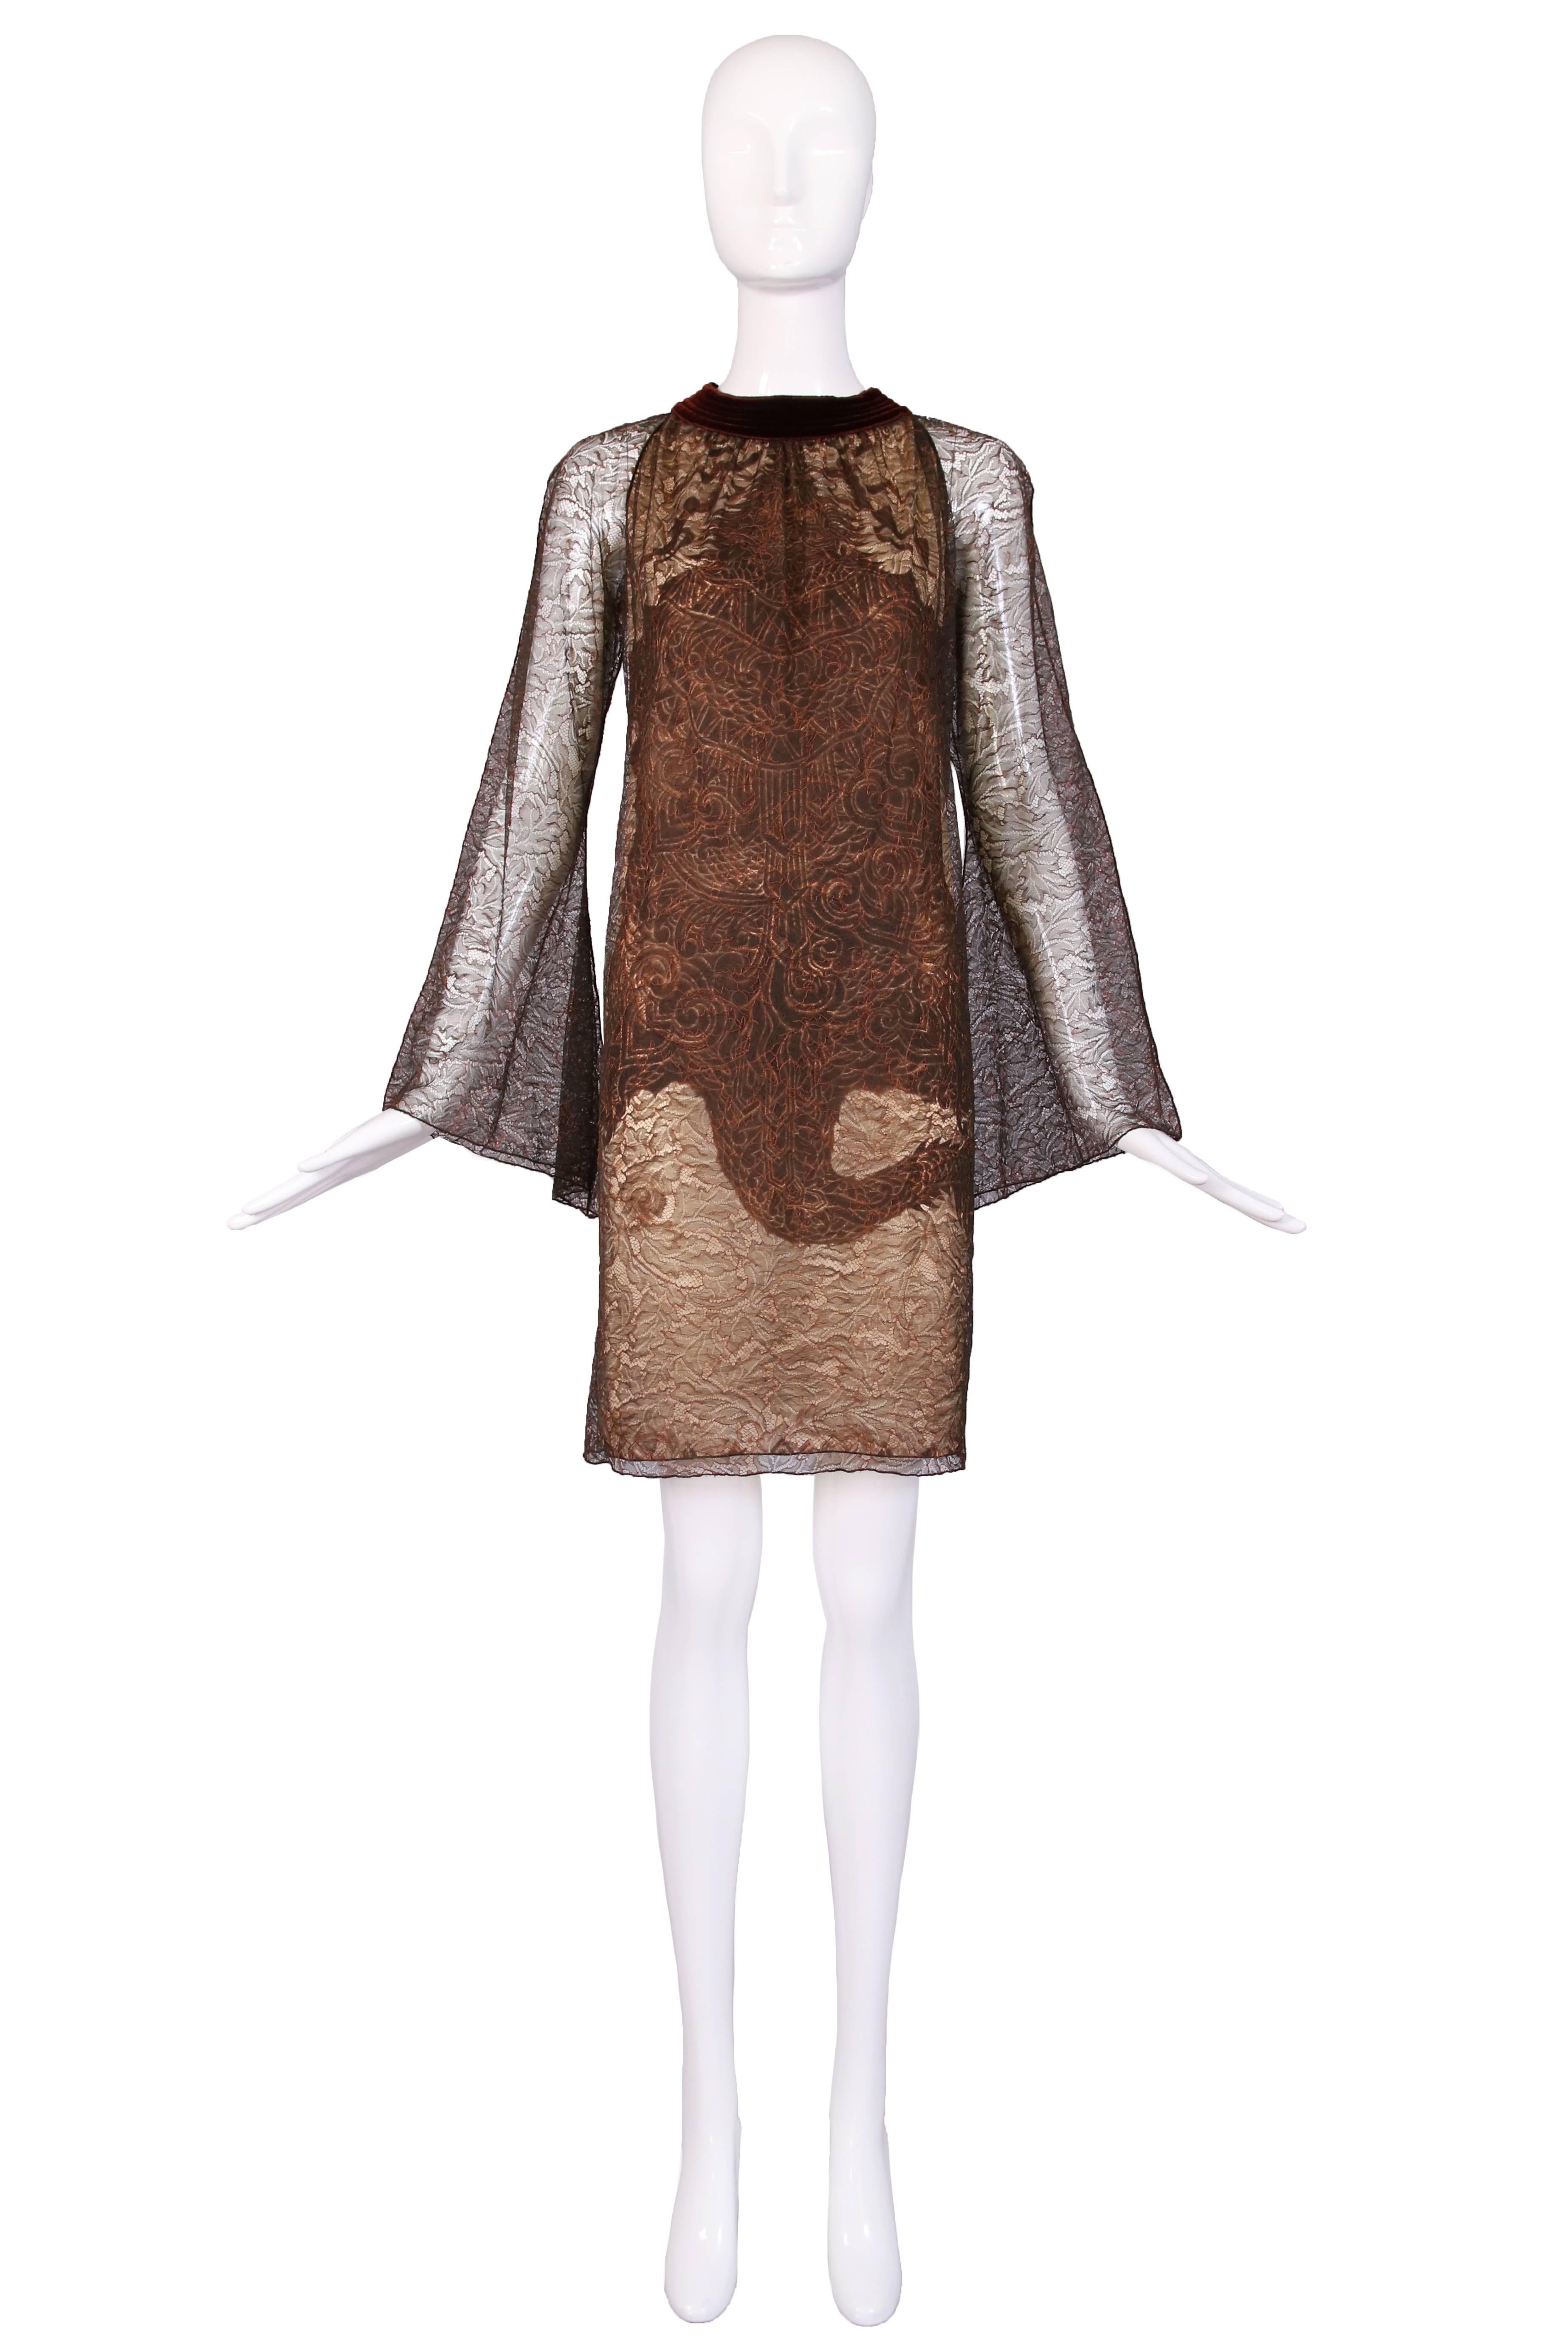 Vintage Jean Paul Gaultier mini dress with a dragon featuring a stretch lace overlay, brown velvet collar and illusion bell sleeves. In excellent condition. US size 6.